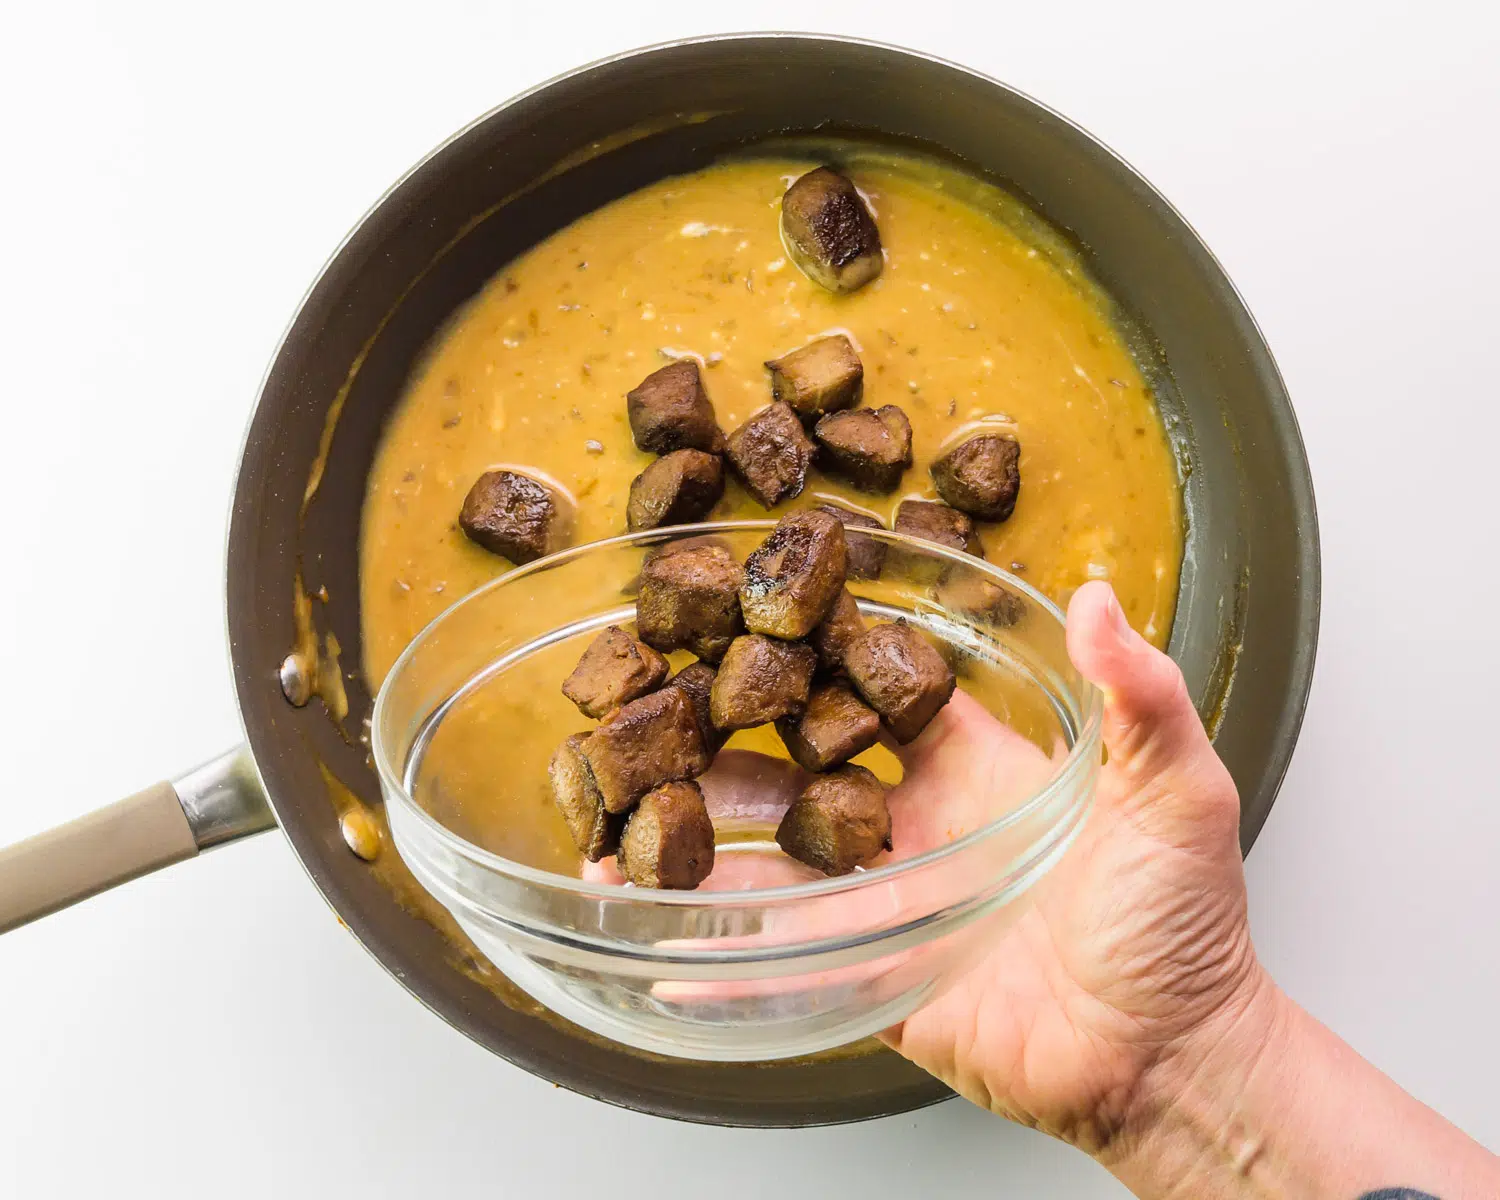 A hand holds a bowl of cooked vegan beef, adding them to a skillet with a creamy brown sauce.